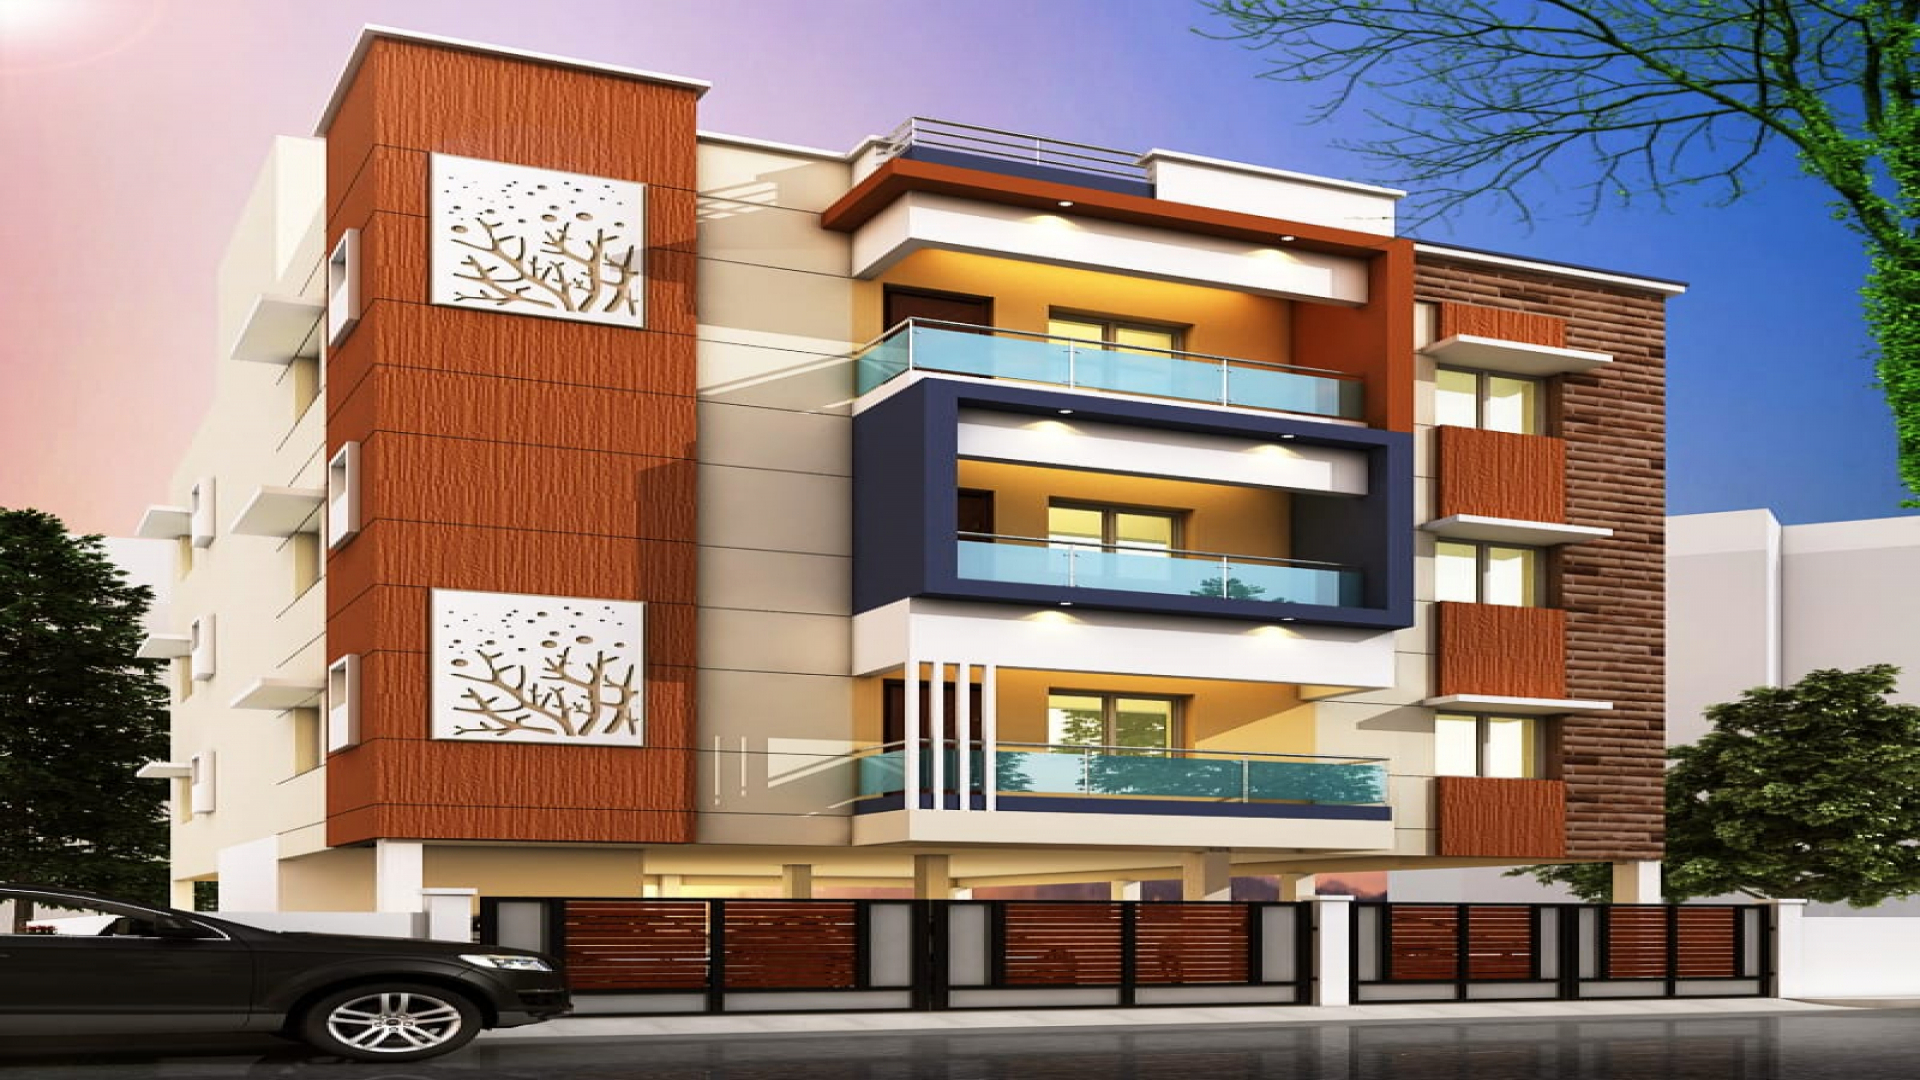 2 BHK Apartment for sale in Thoraipakkam